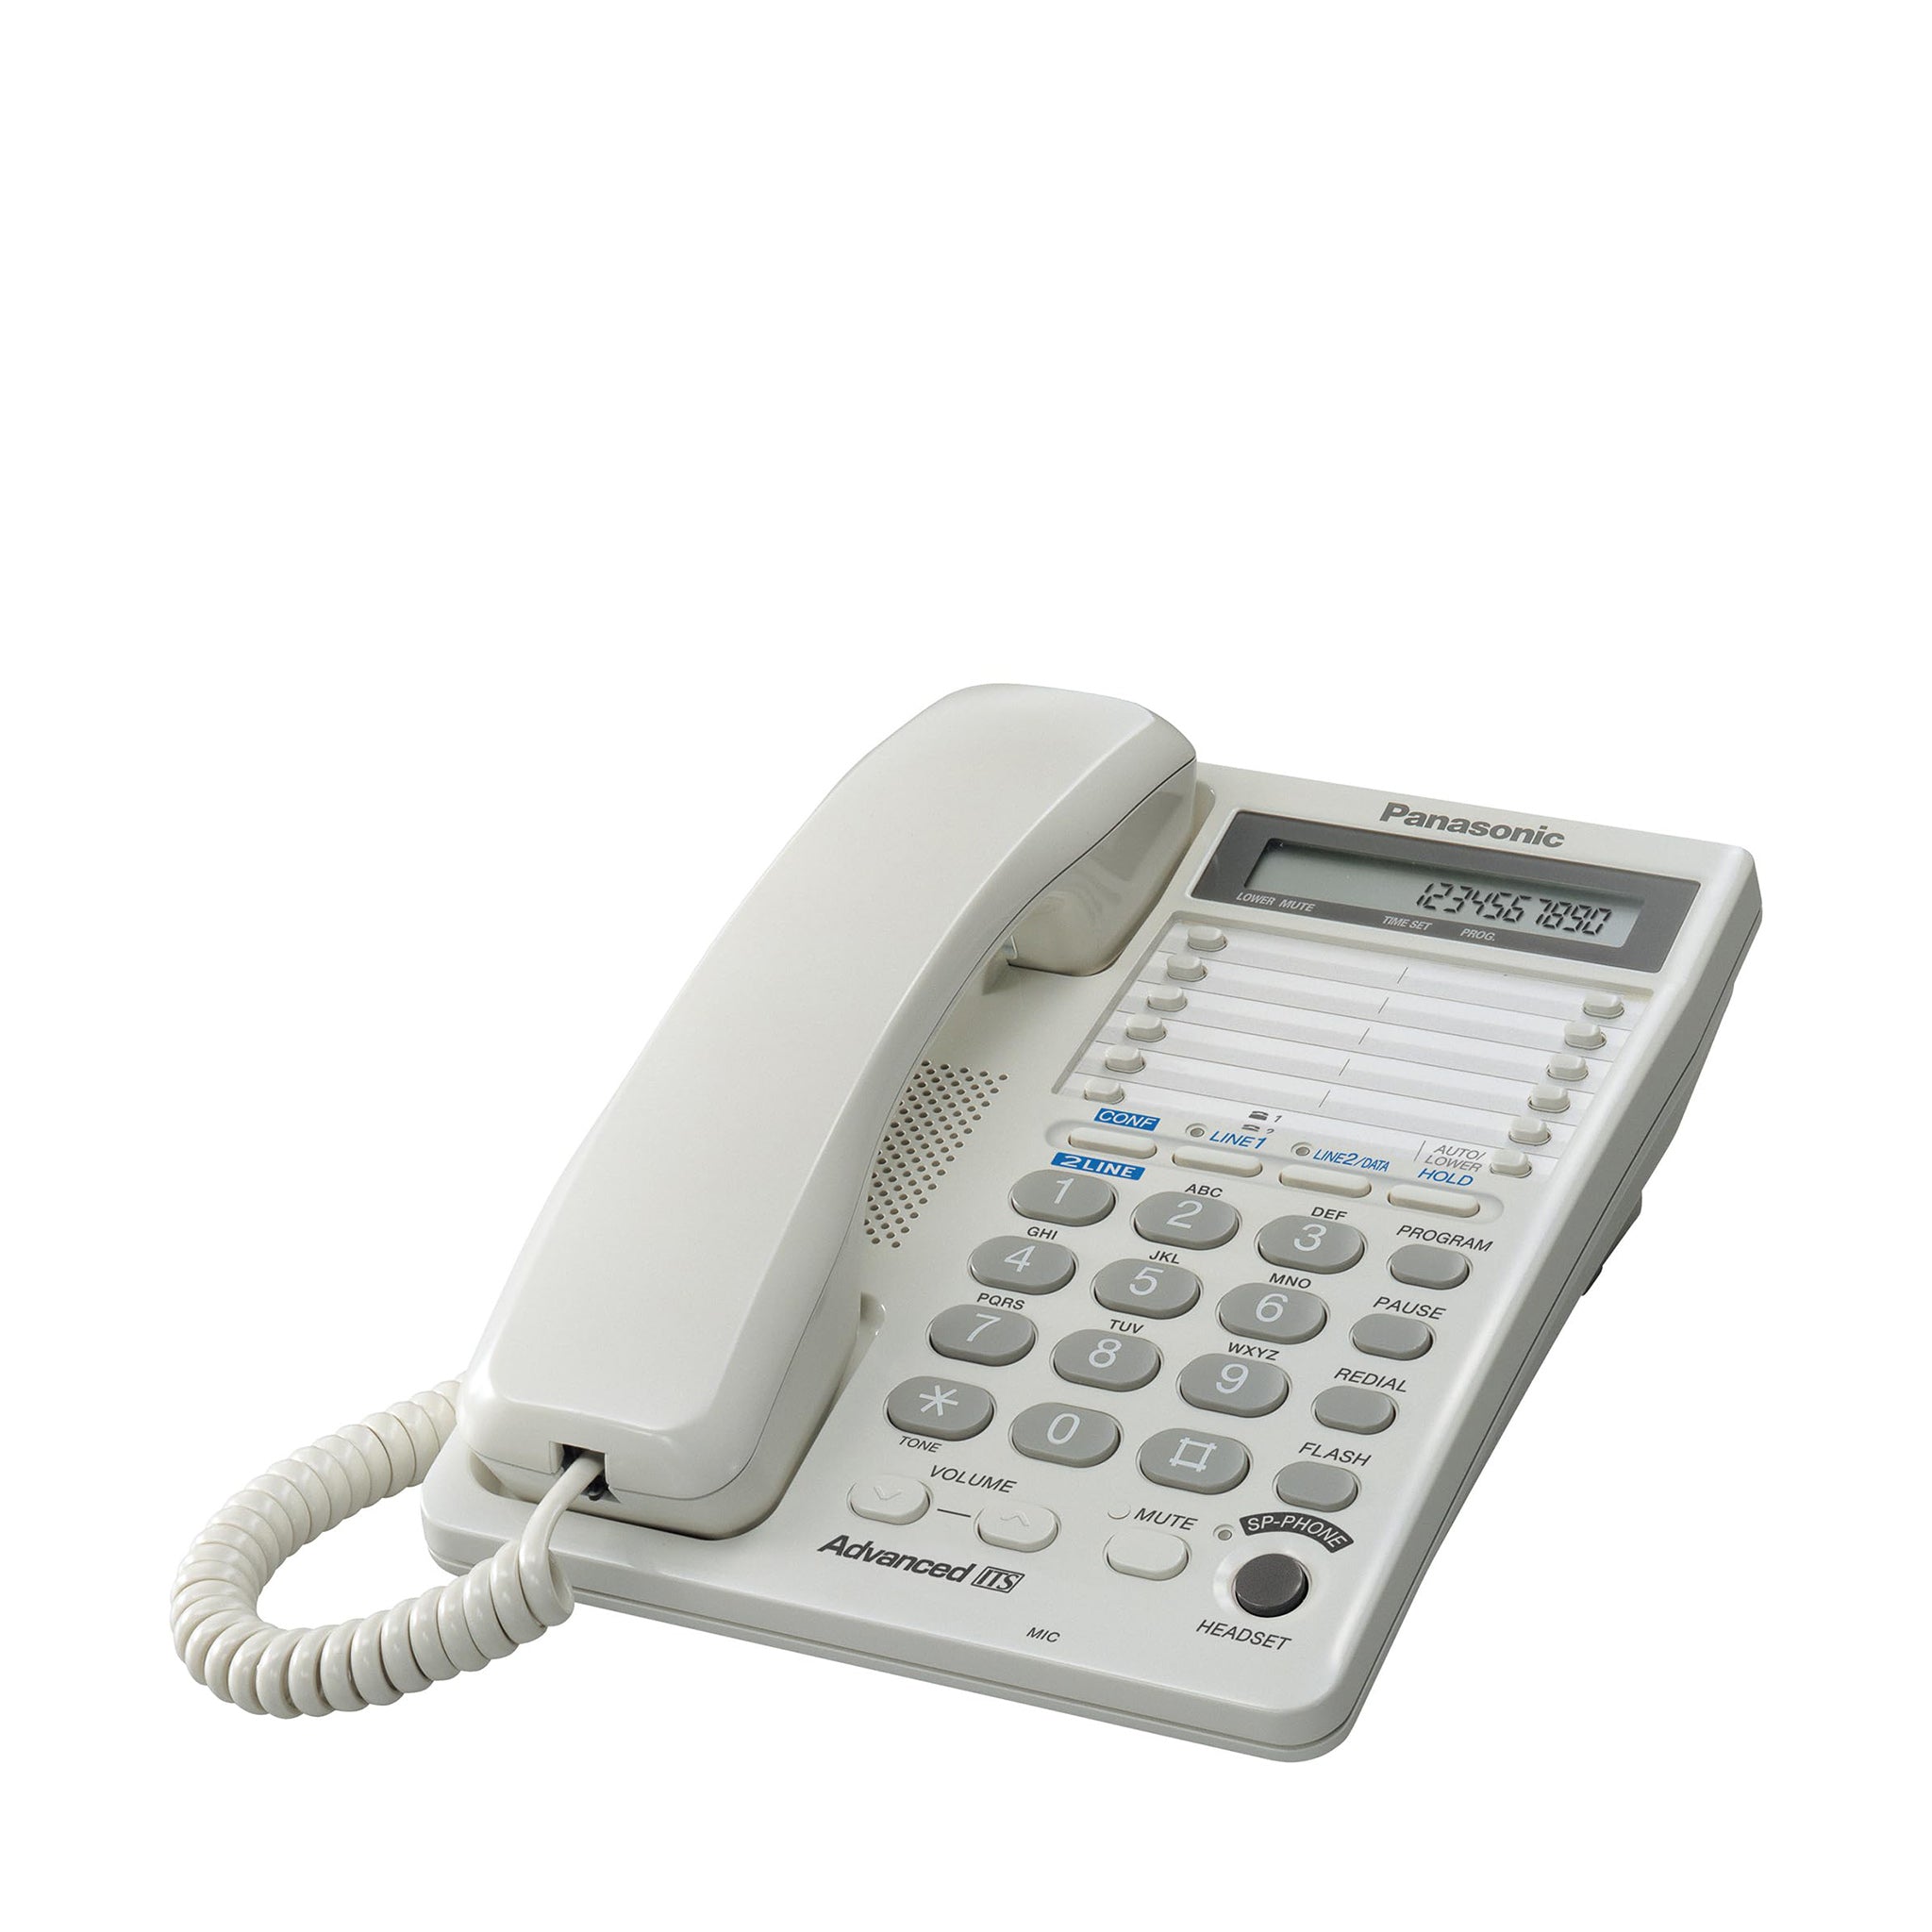 Panasonic Link2Cell Corded Phone KX-TGF382M - Digital Machine Handsets, with Answering 2 Corded System